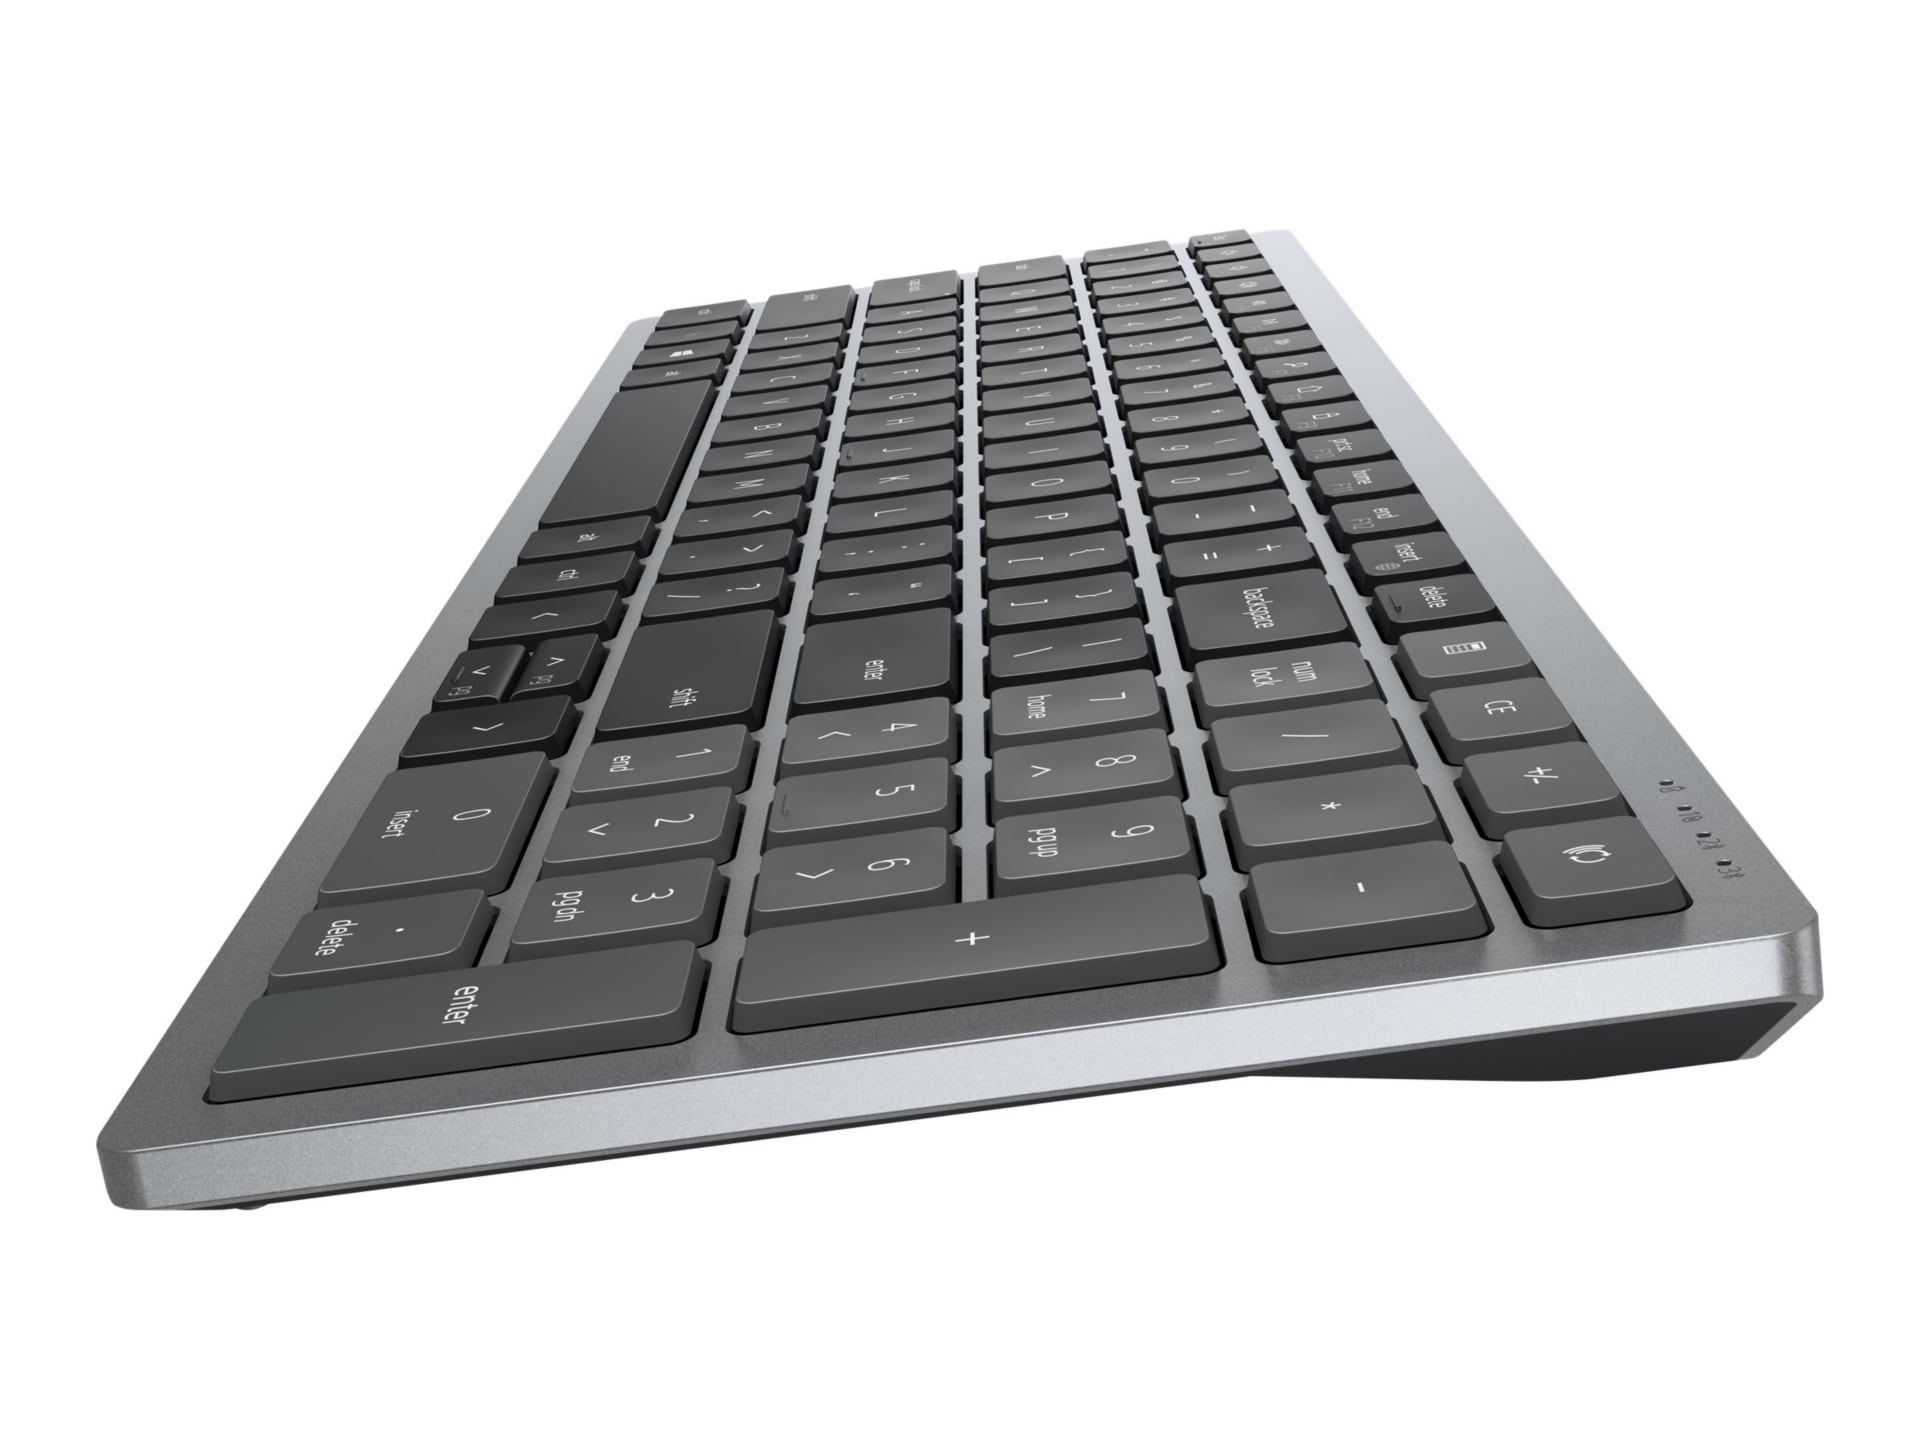 Any way to replace the “textile” on top of the keyboard? Surface